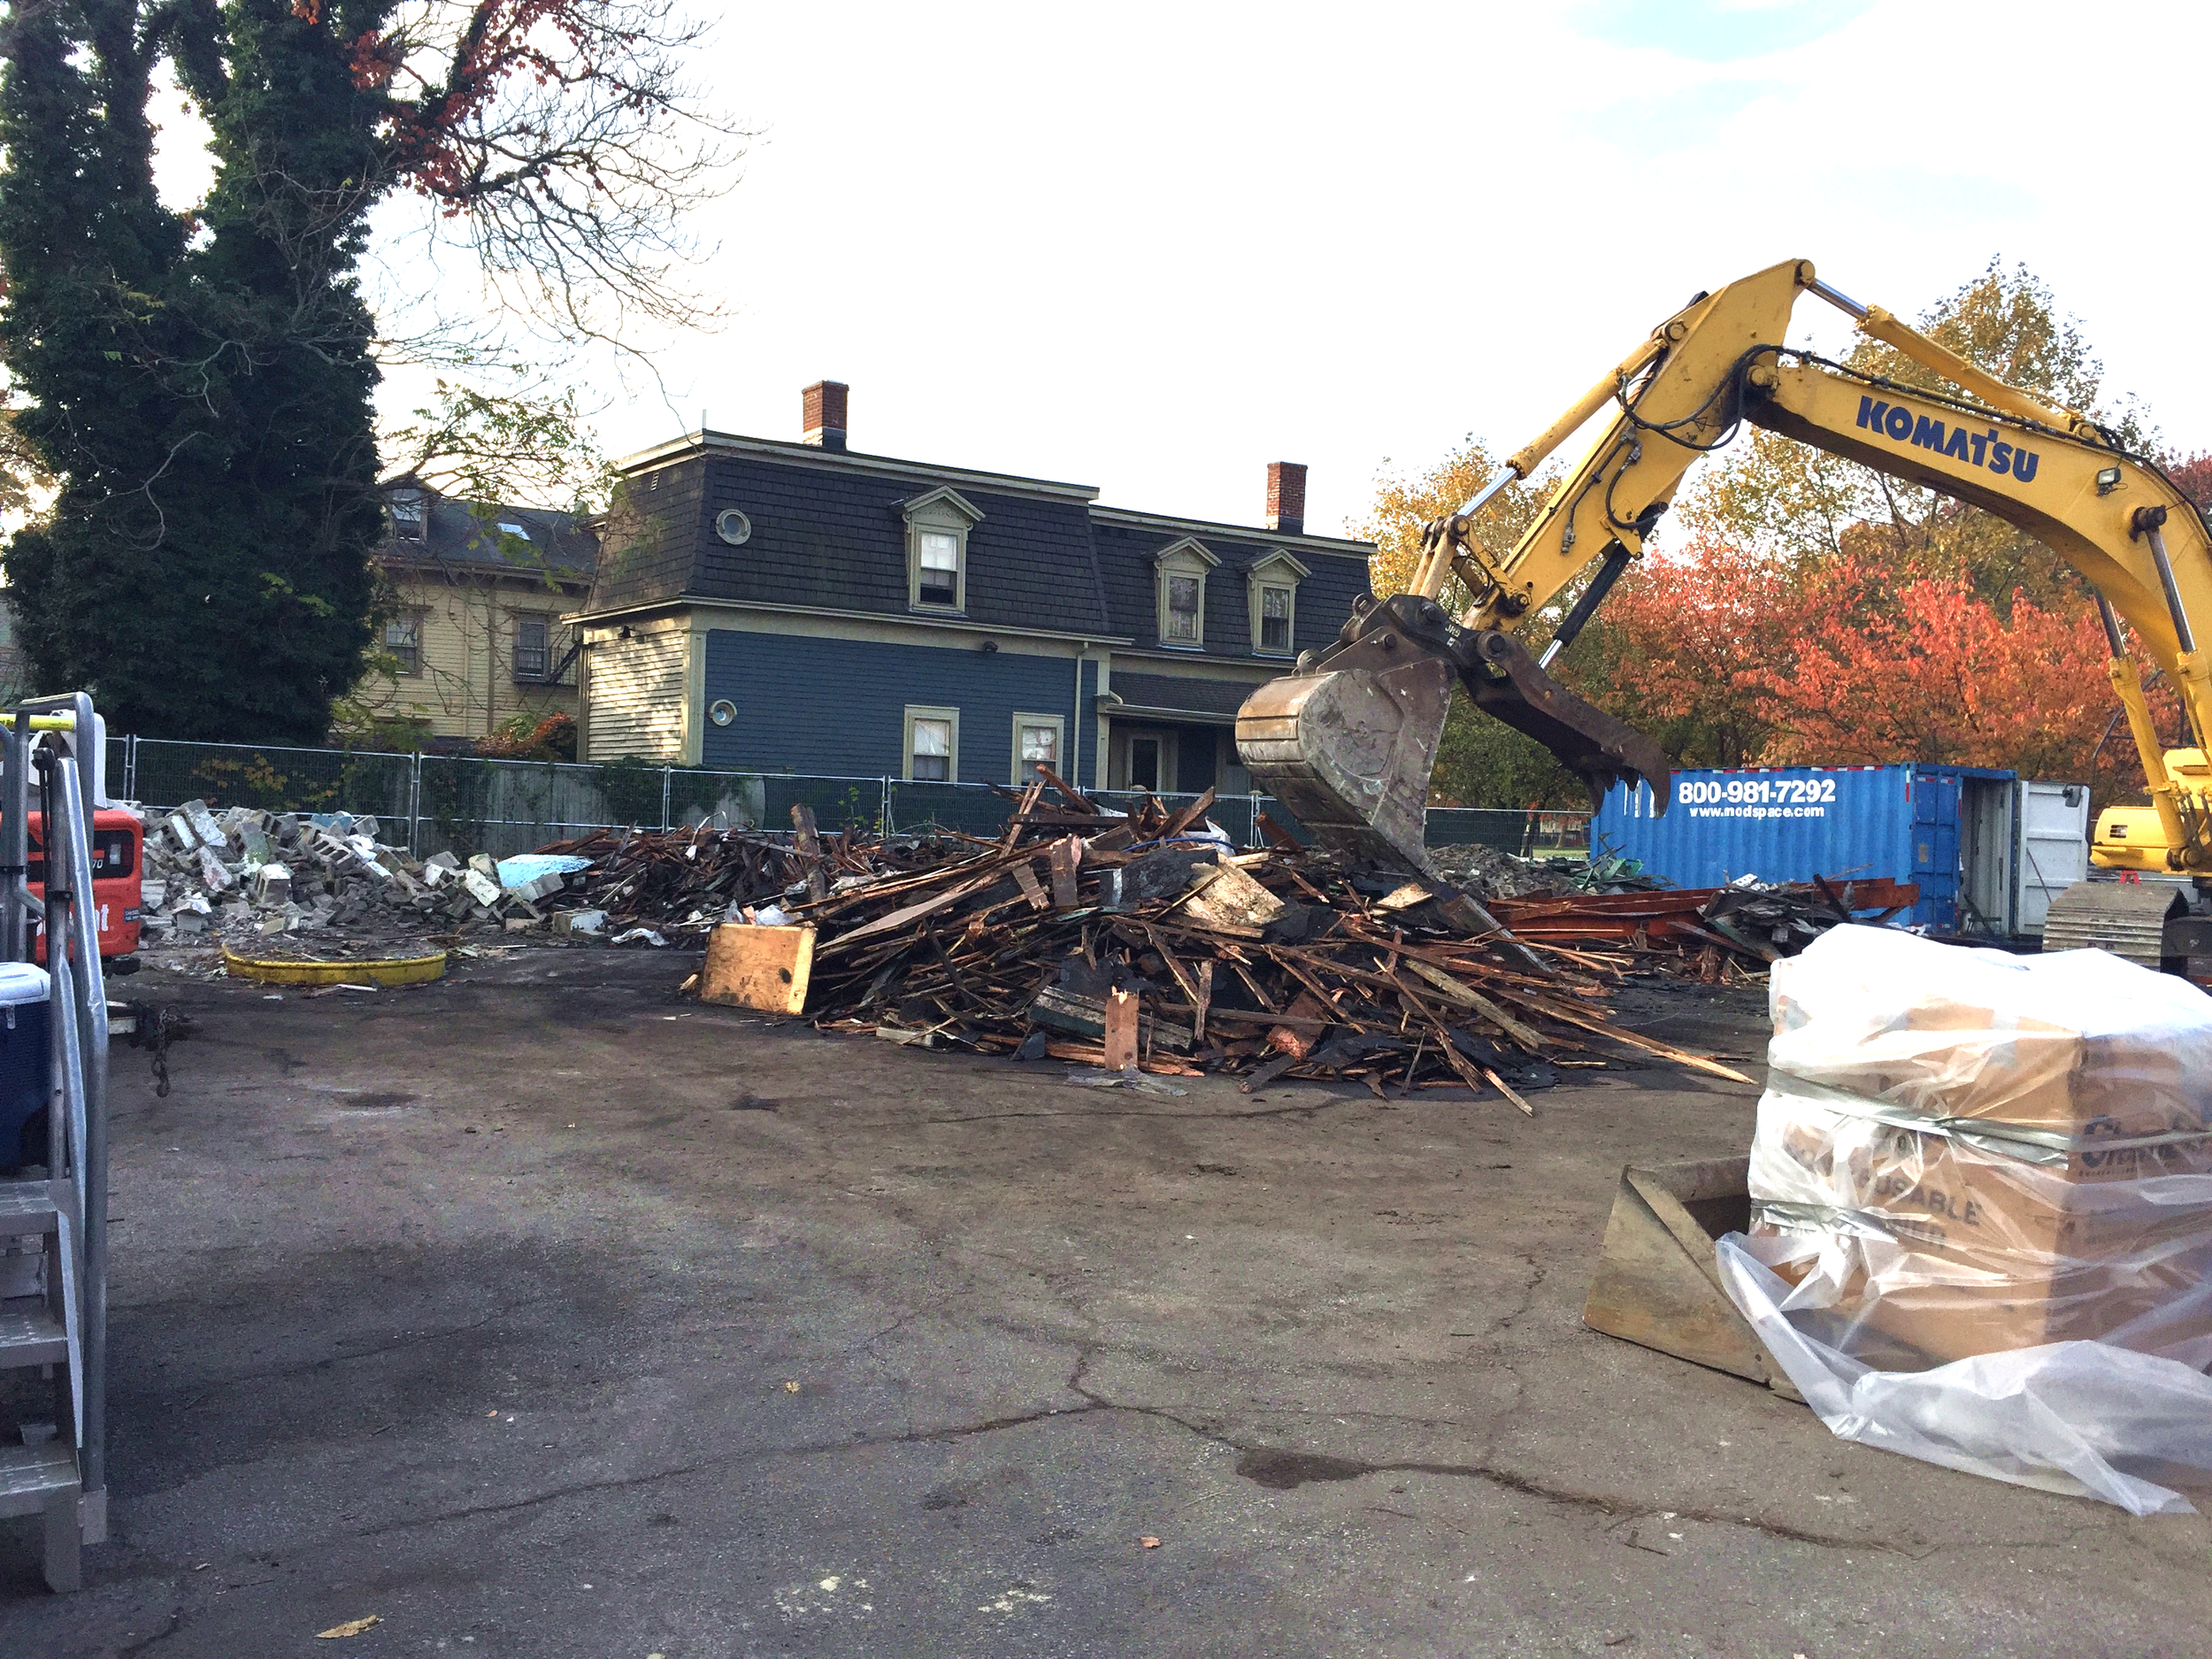  The building is down – November 2016 